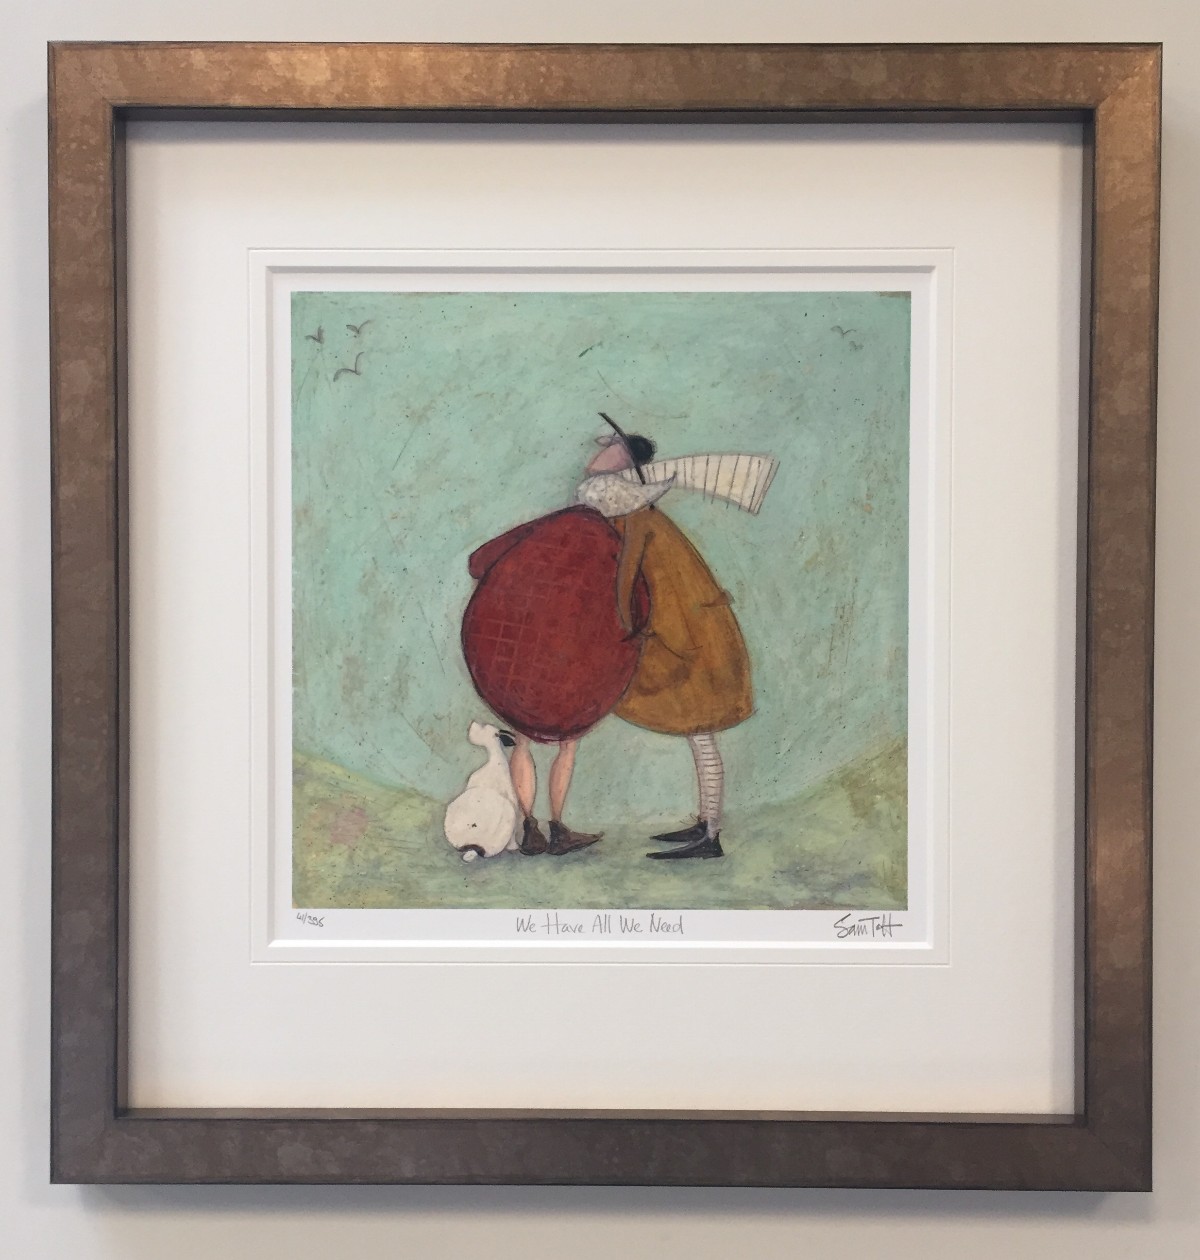 We Have all we Need by Sam Toft